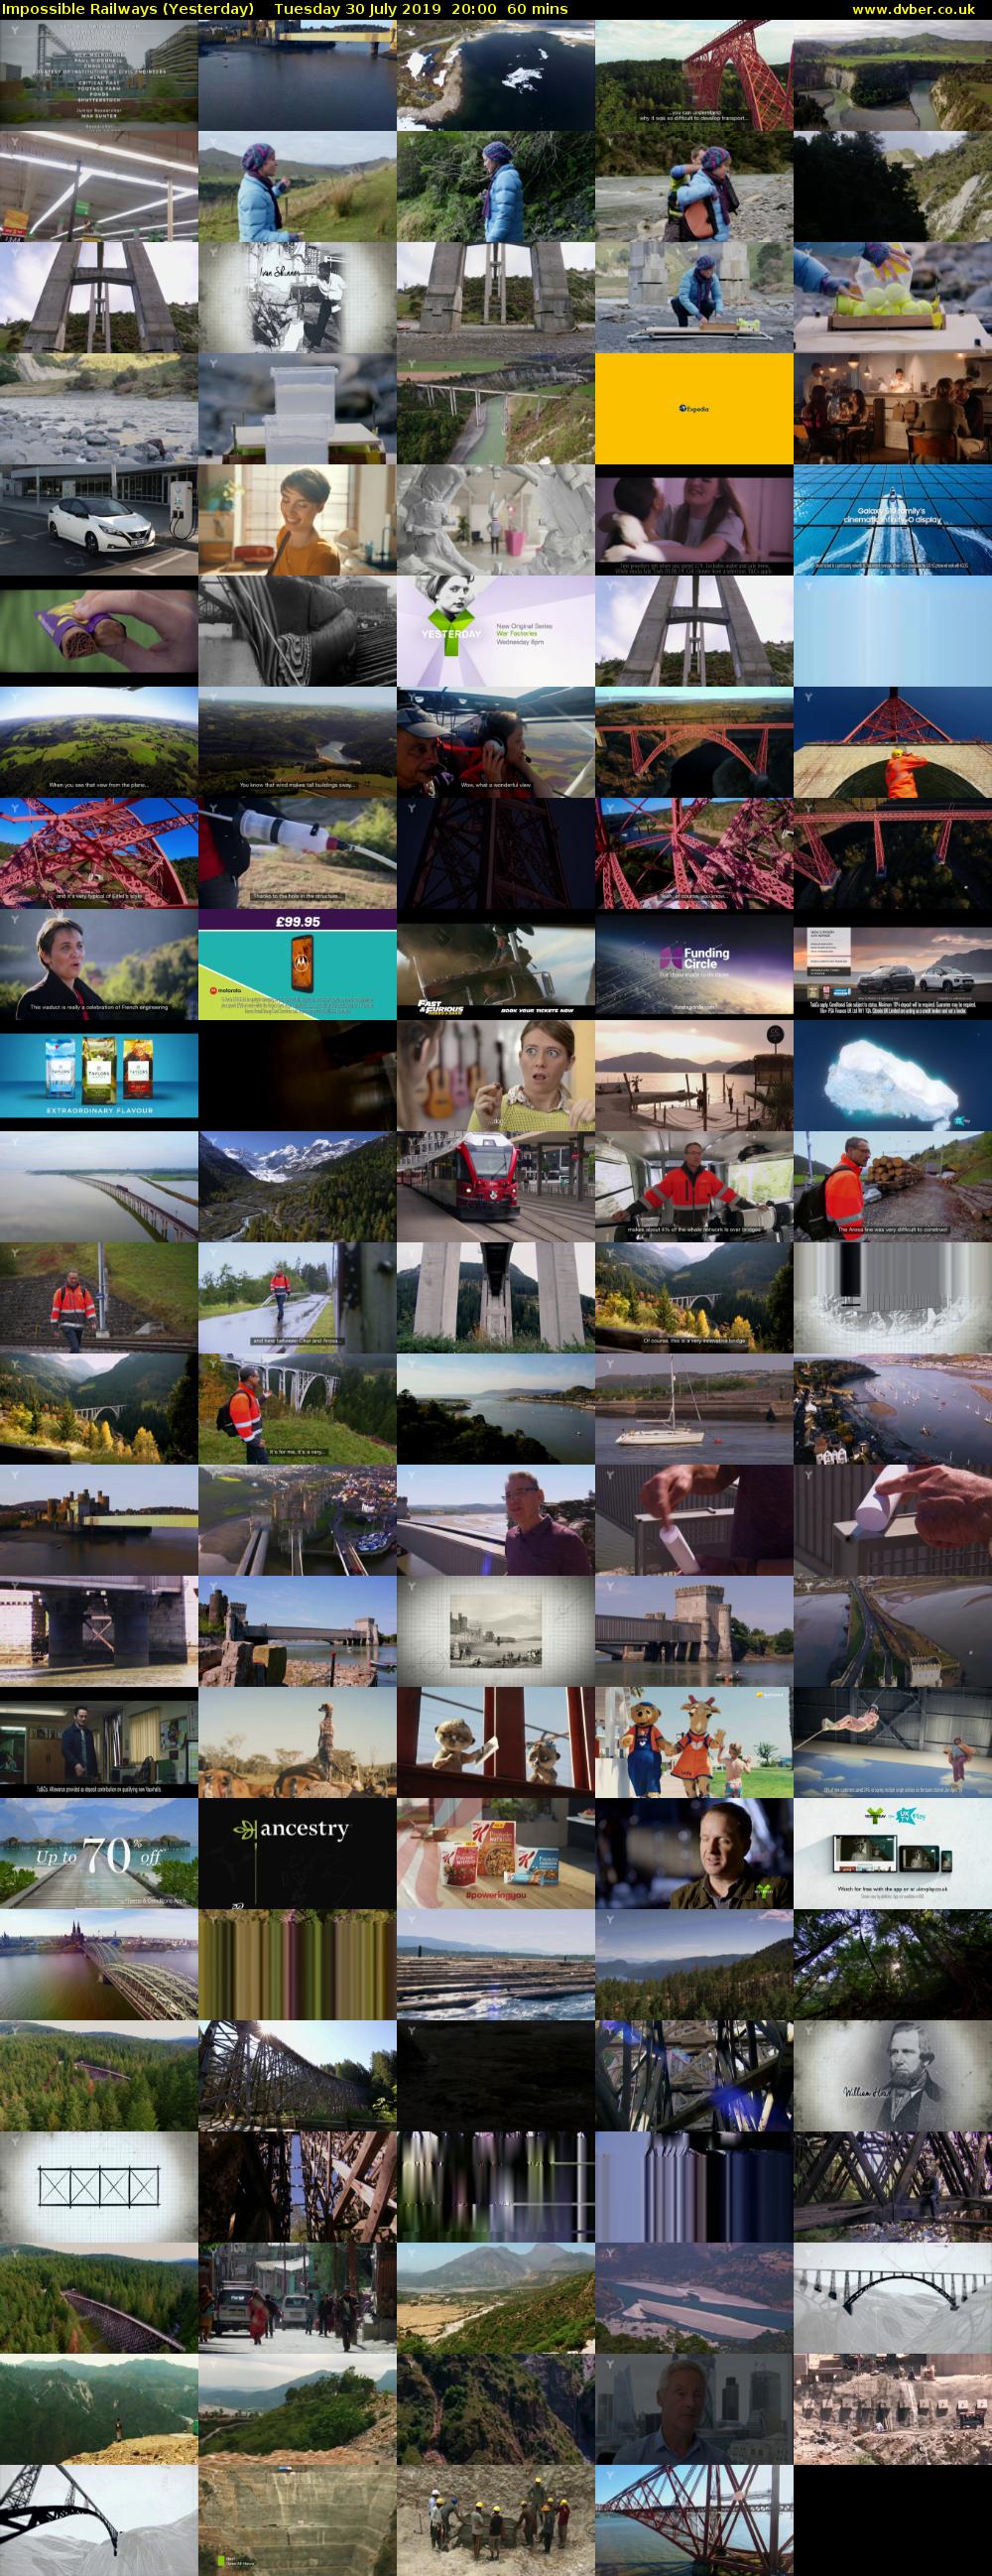 Impossible Railways (Yesterday) Tuesday 30 July 2019 20:00 - 21:00